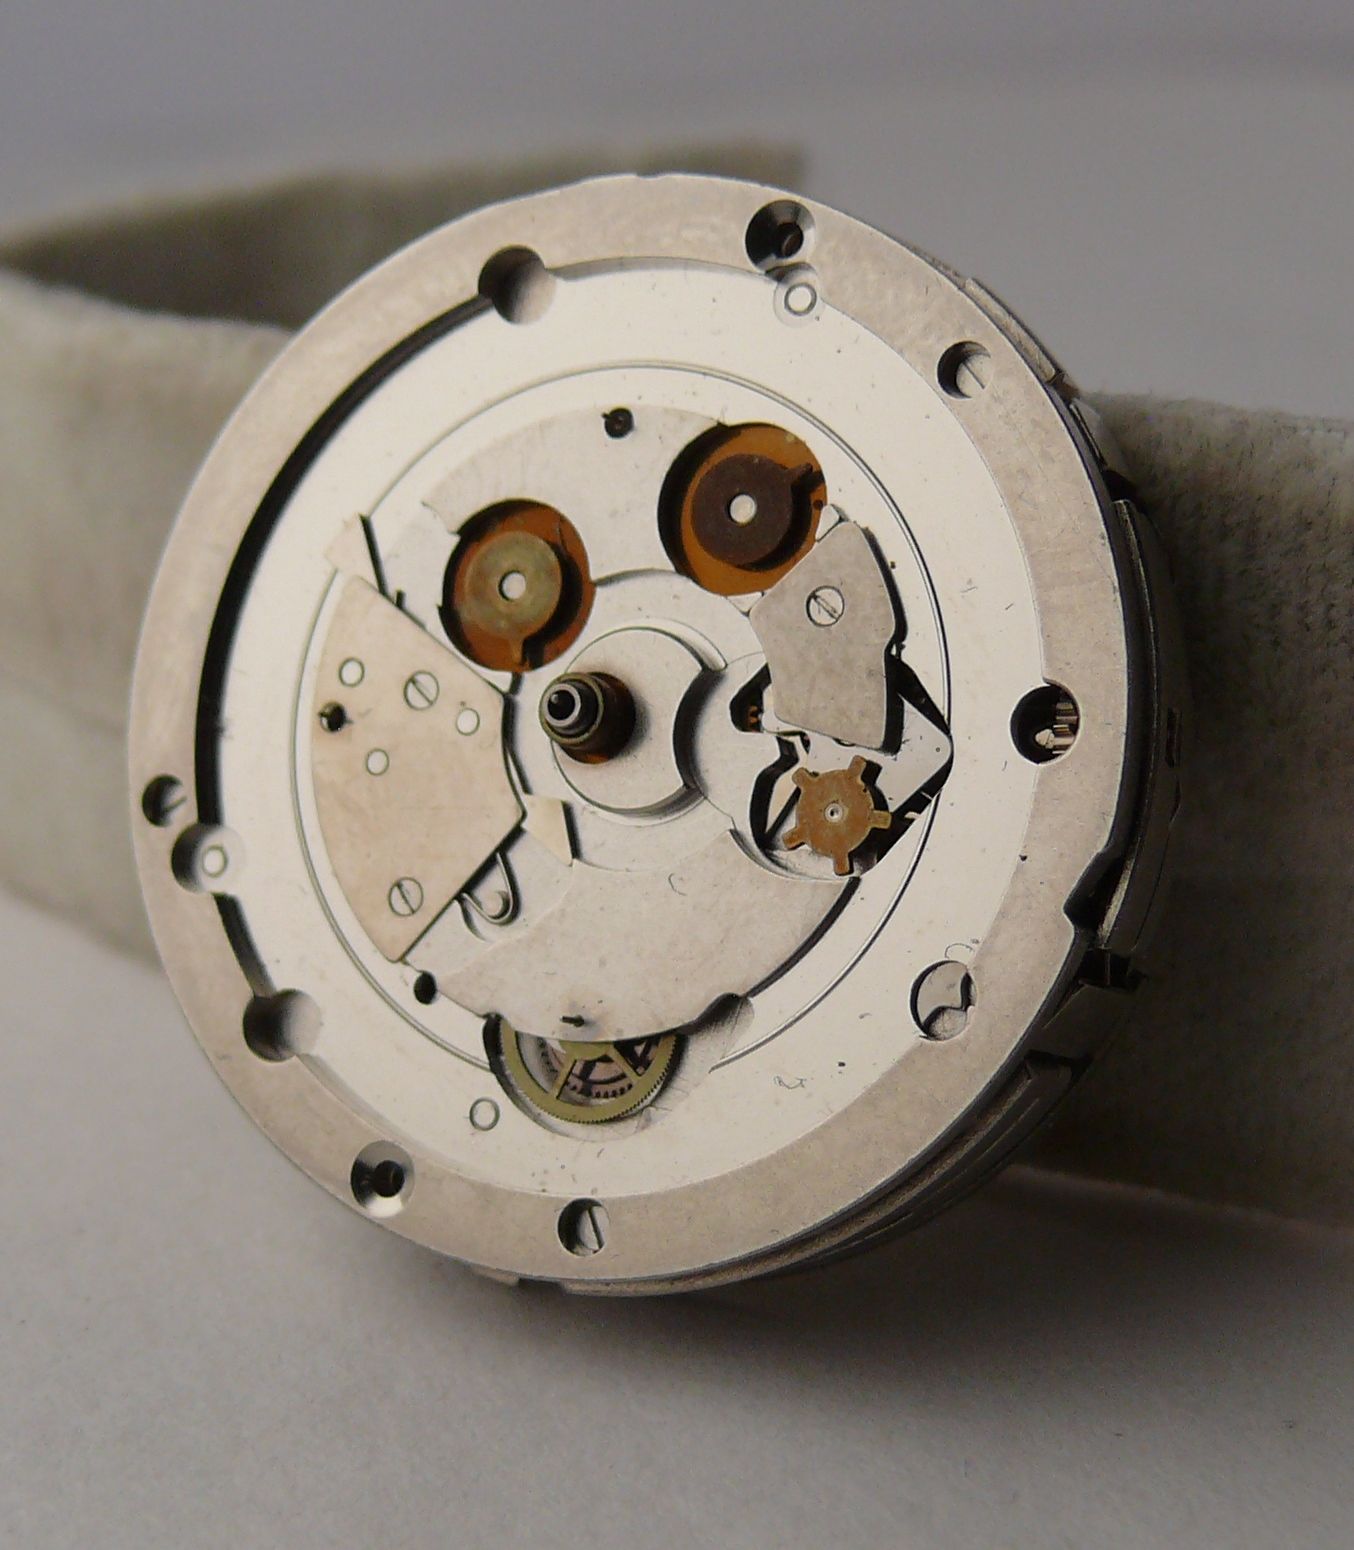 Vintage Valjoux Chronograph 7750 Incomplete Movement. Suitable for parts projects or being restored. - Image 2 of 3